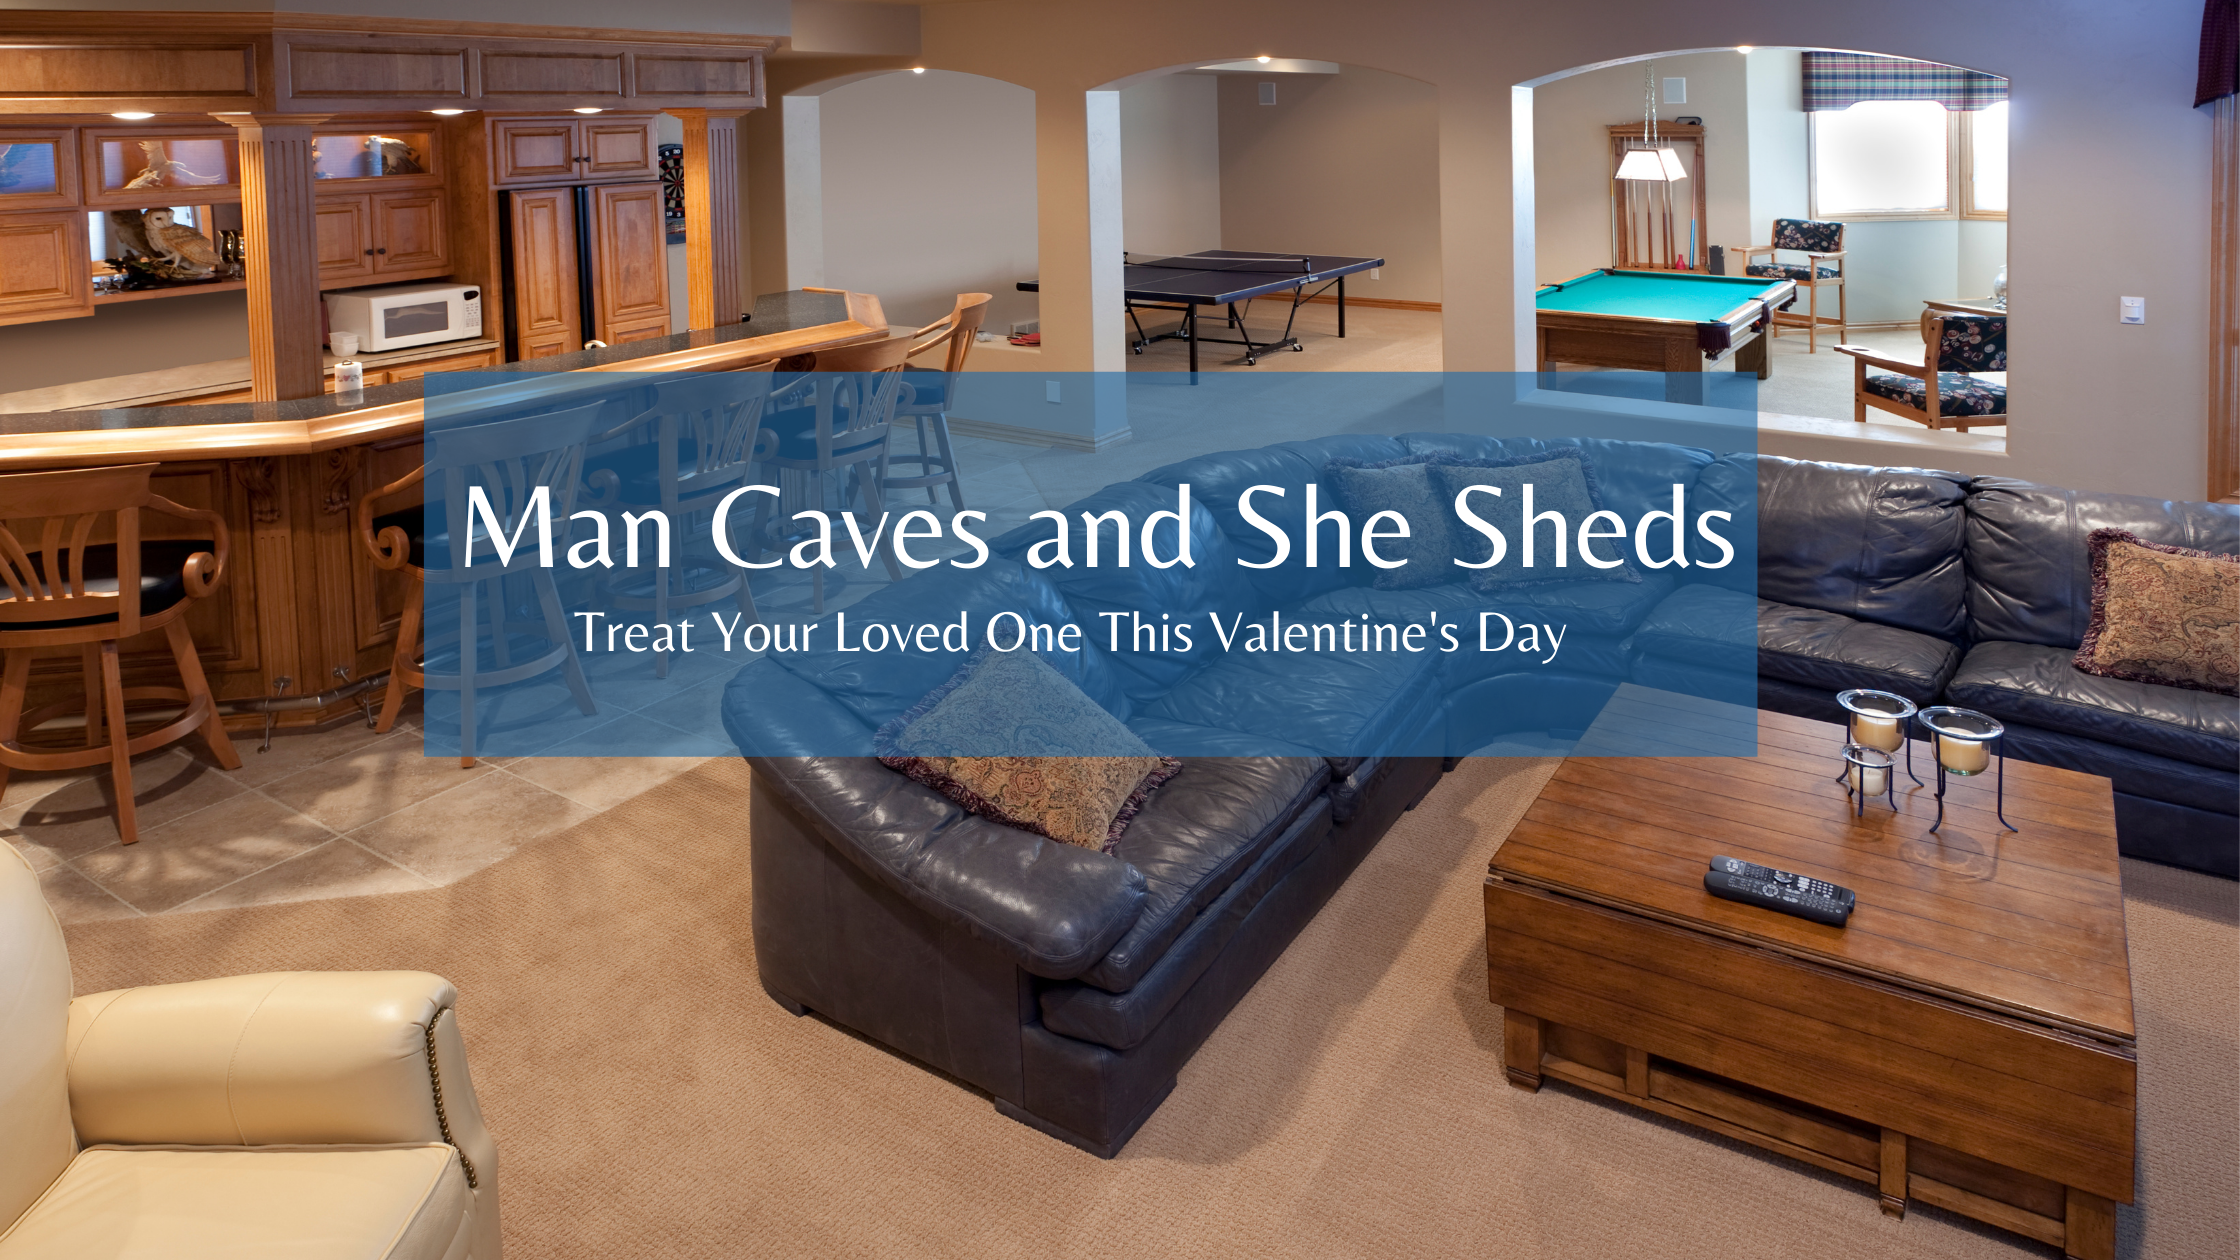 https://handymanconnection.com/wp-content/uploads/2021/05/Man-Caves-and-She-Sheds.png